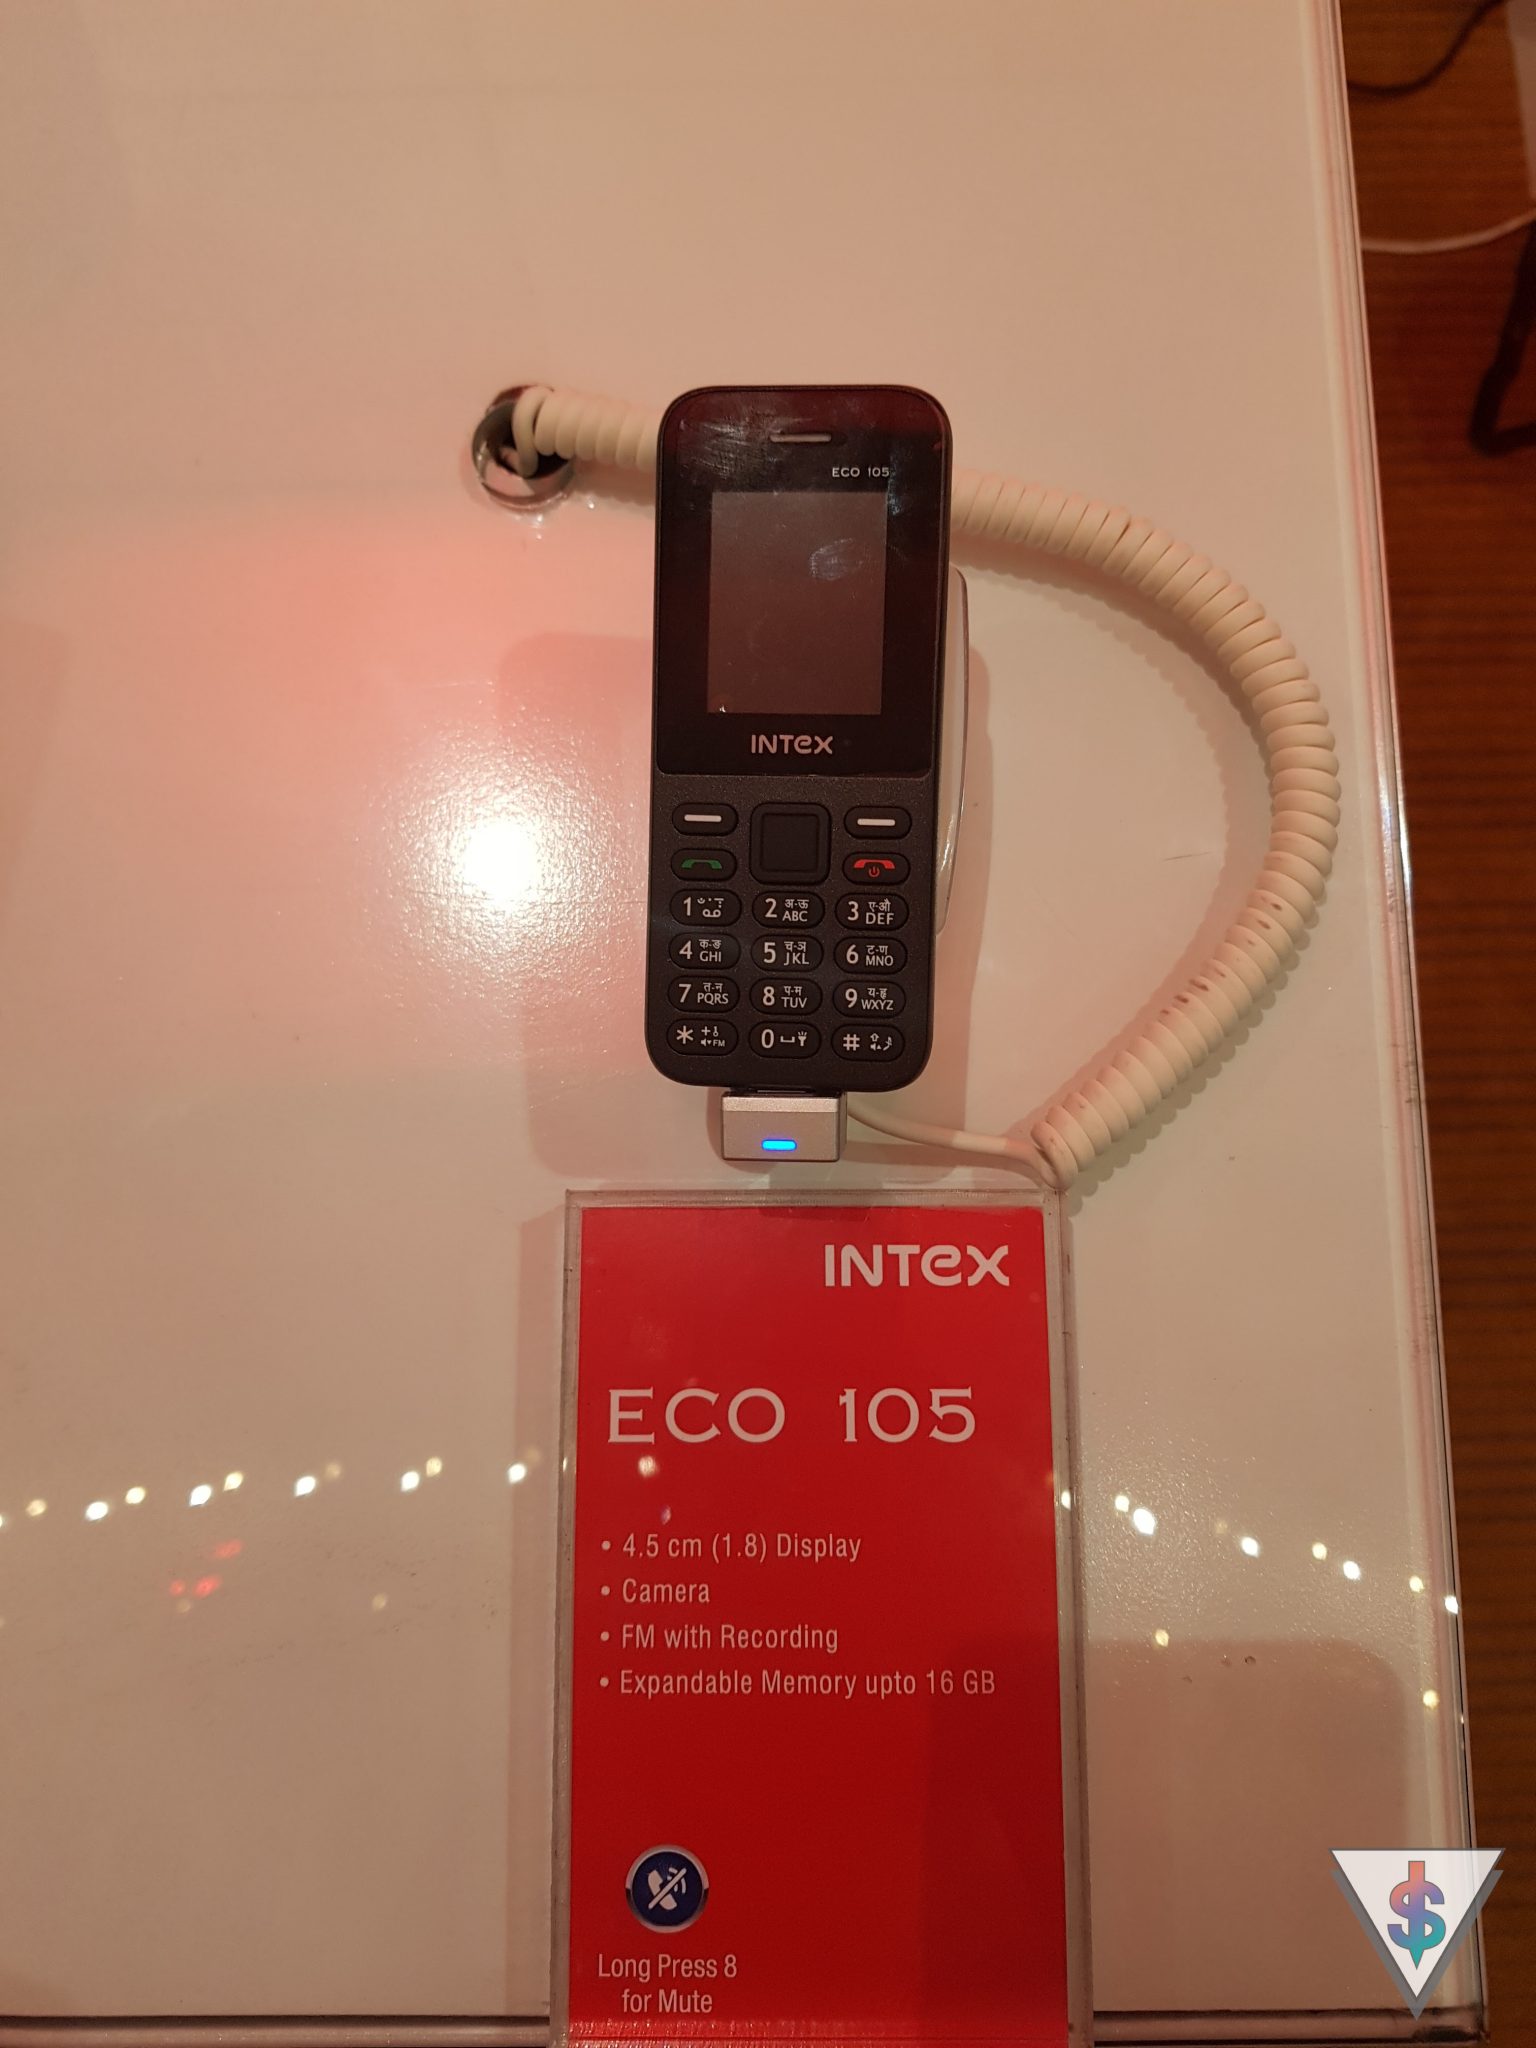 Intex AndroDollar 11 - Intex partners with Softlogic to unveil the Aqua A4, Aqua Lions 4G and more budget oriented devices in Sri Lanka